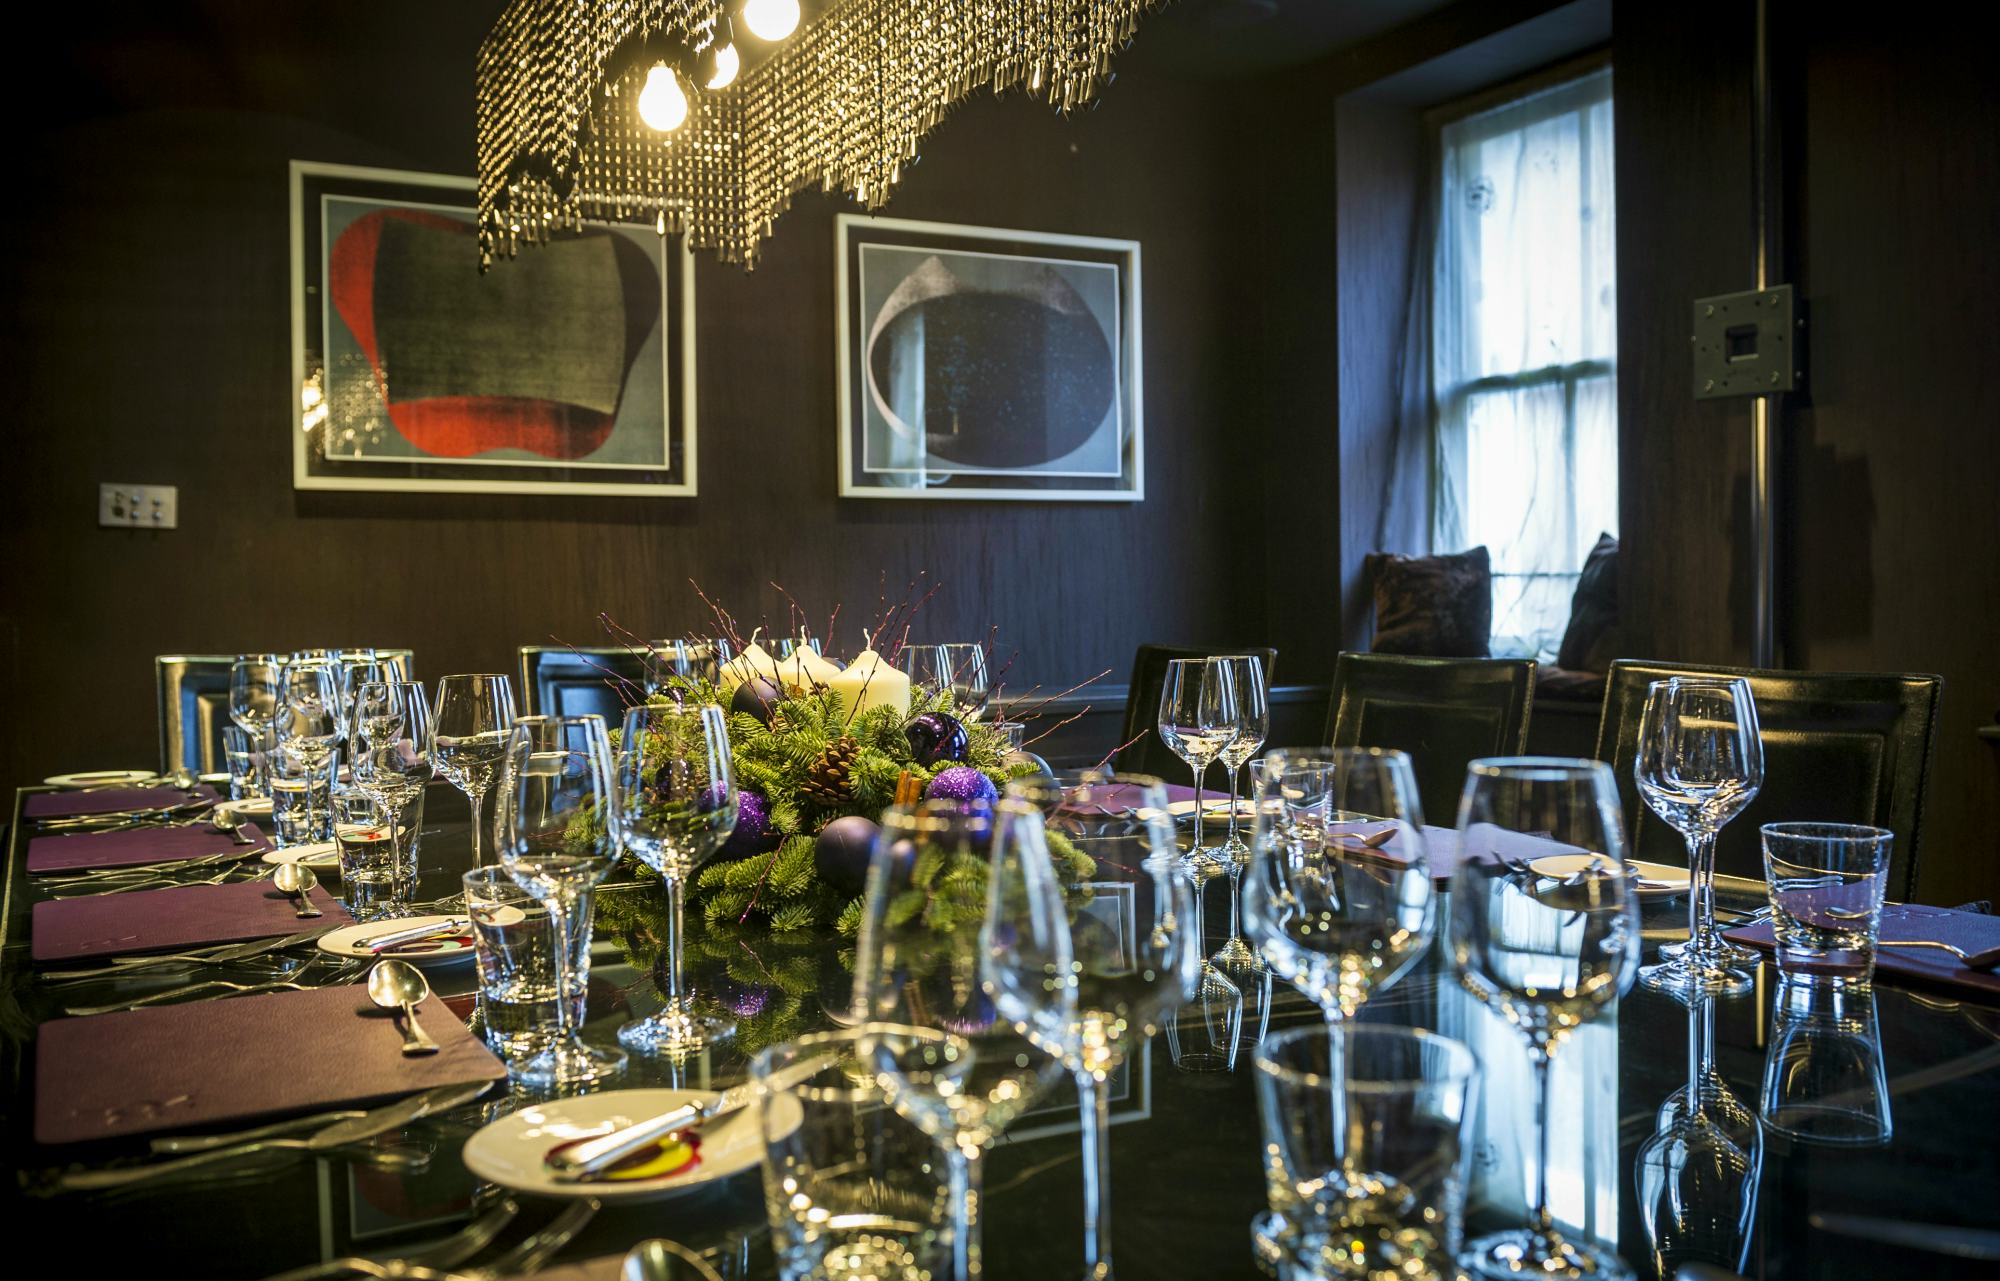 Pied a Terre london restaurants private dining room events venue hire interiors table setting